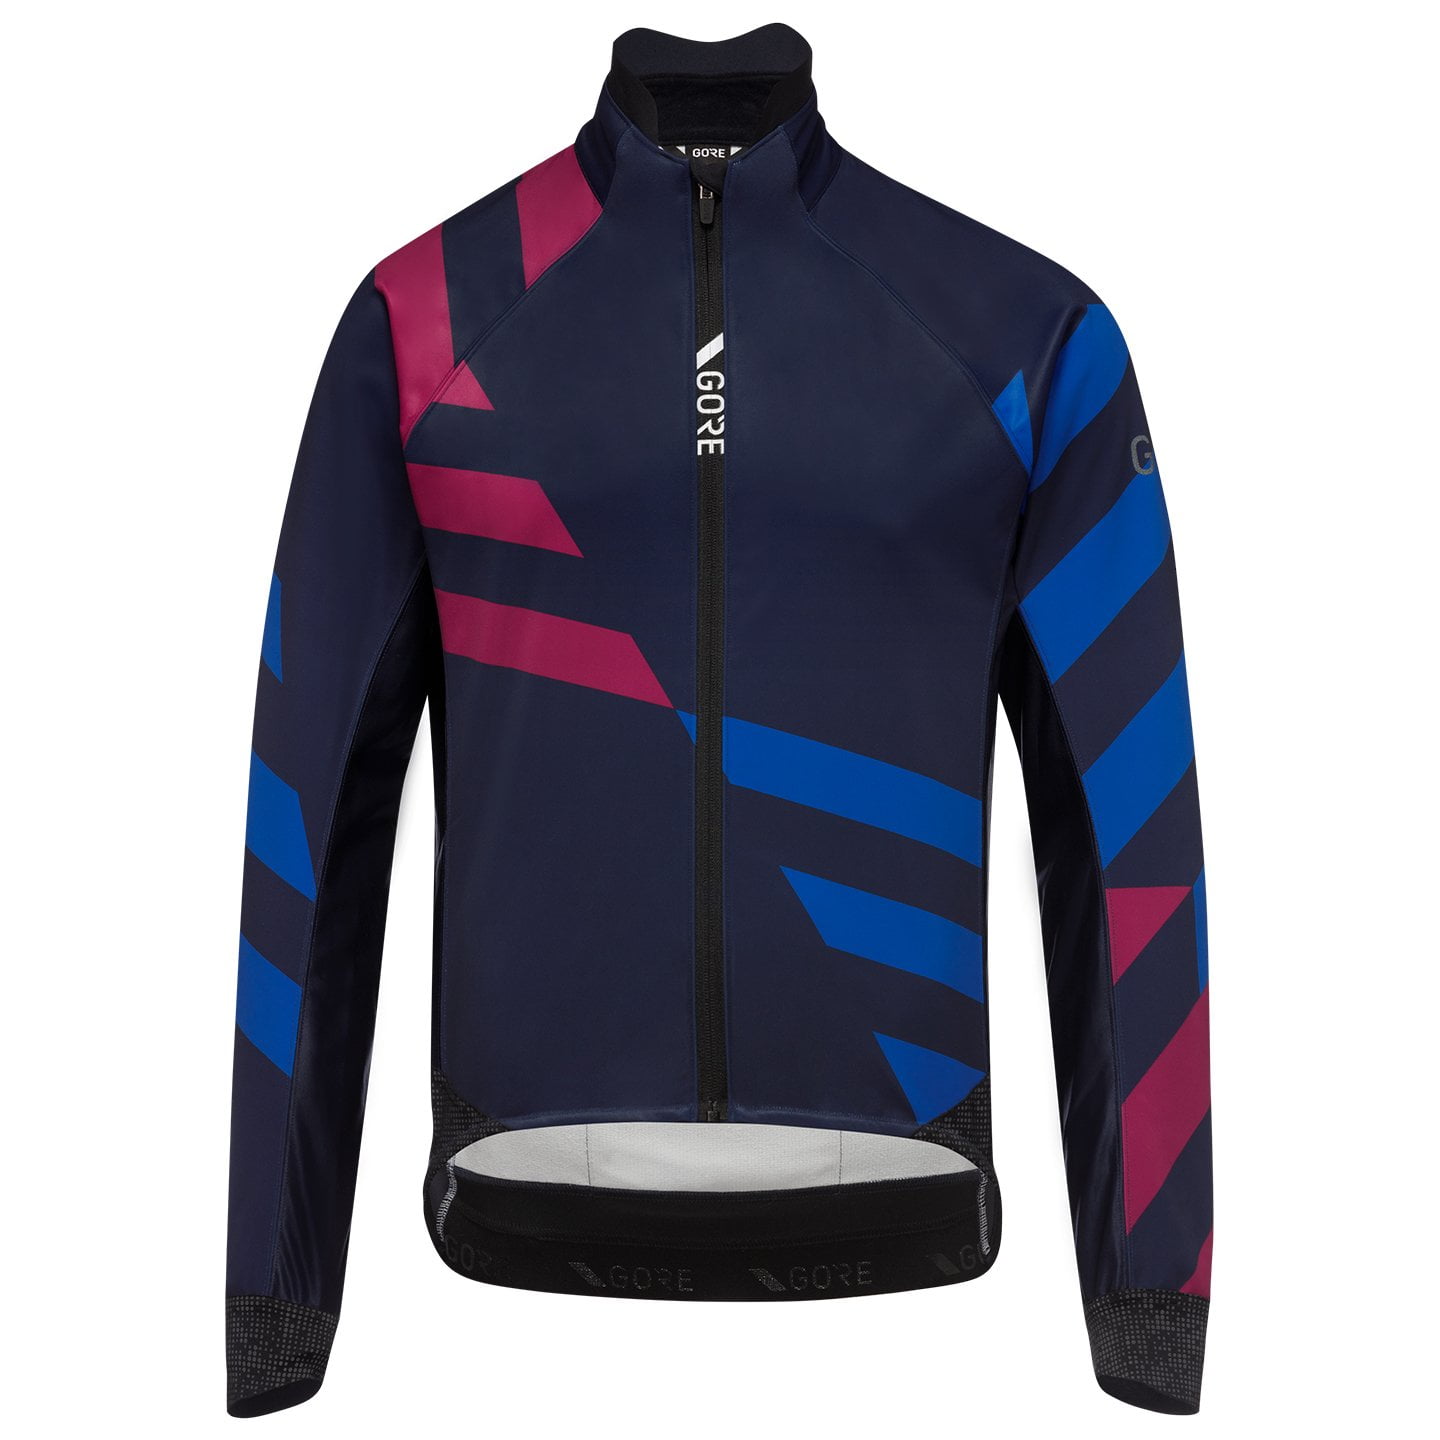 GORE WEAR Winter Jacket C5 Gore-Tex Infinium Signal Thermal Jacket, for men, size M, Cycle jacket, Cycling clothing